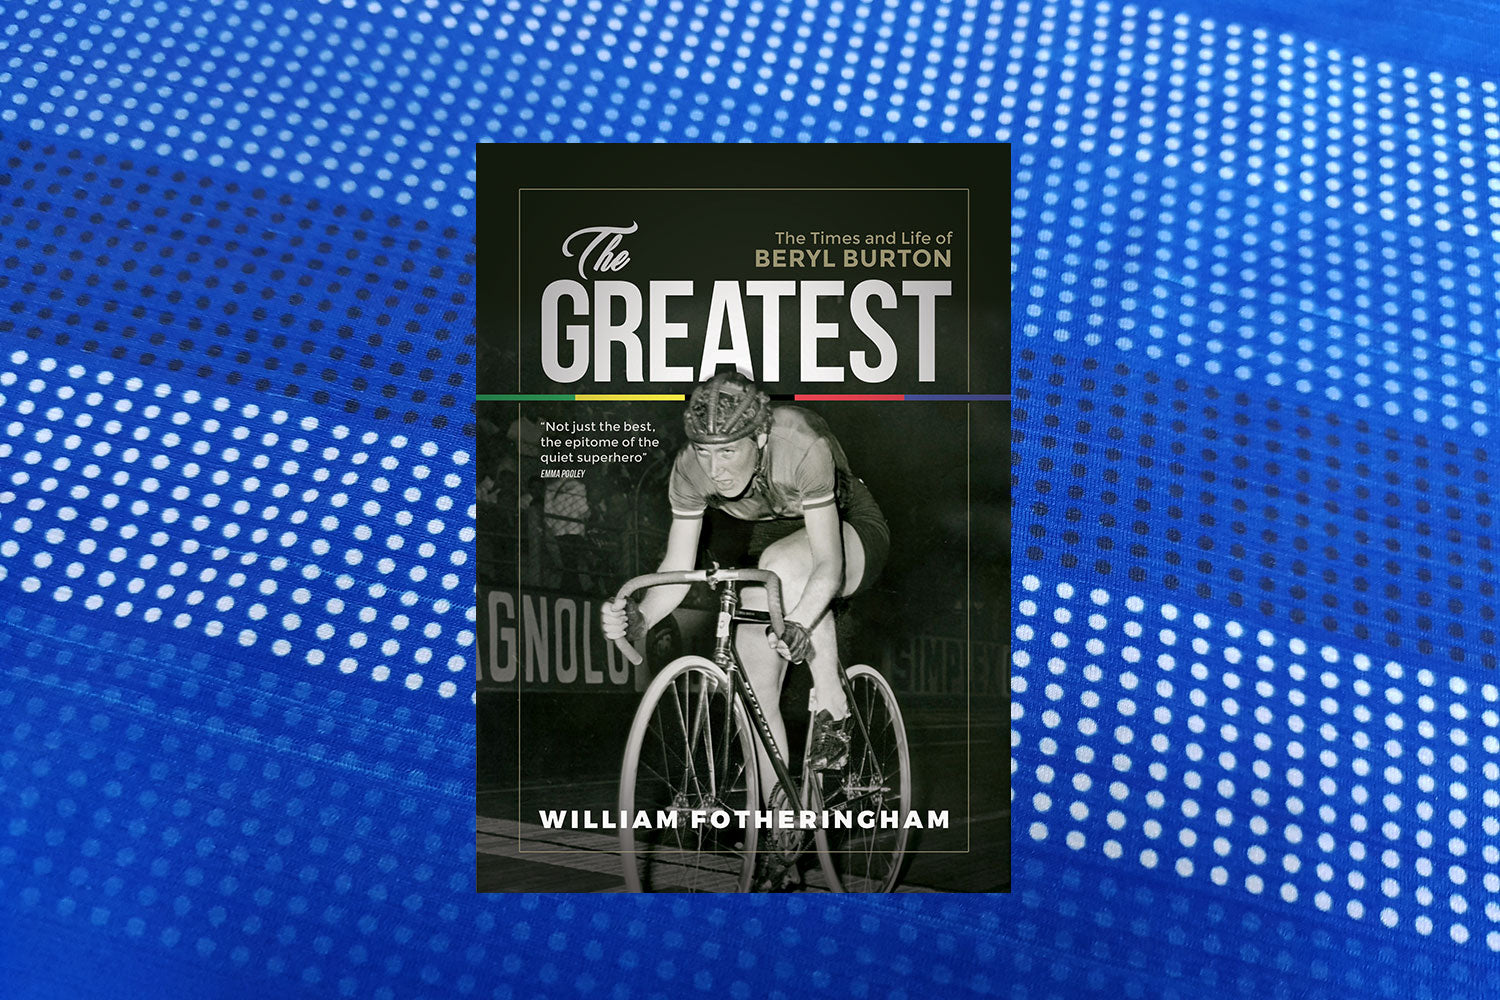 We sat down with William Fotheringham for a Q&A about his latest book The Greatest: The life and times of Beryl Burton.